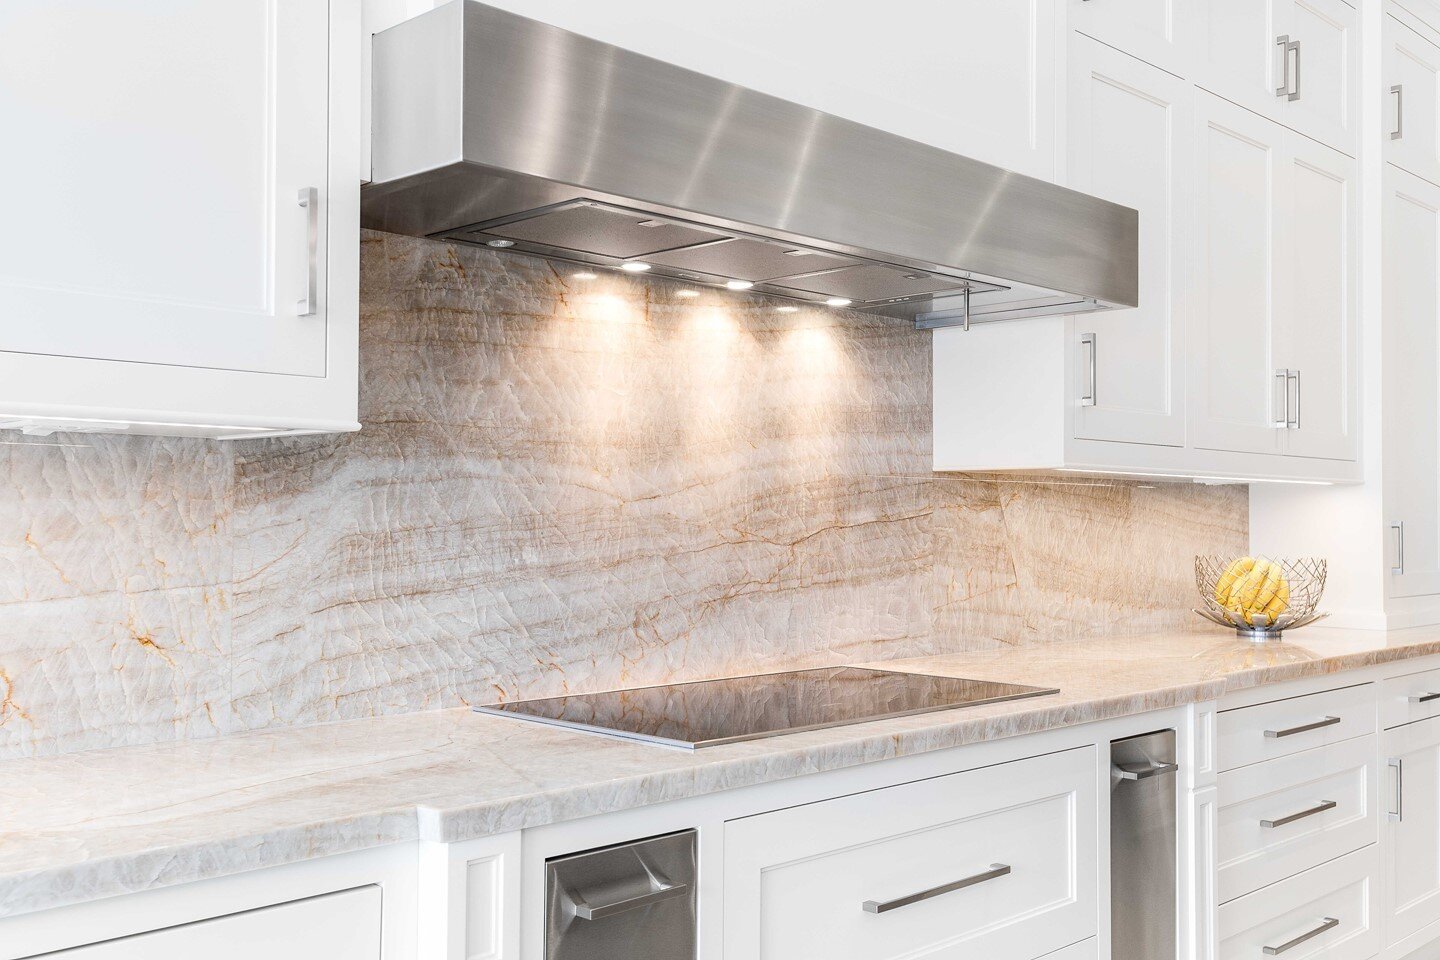 Is your kitchen summer ready? Create a clean, useable space with your dream stone to prepare all your favourite summer snacks!⠀
⠀
Want to learn more about what we offer? Check out the link in our bio.